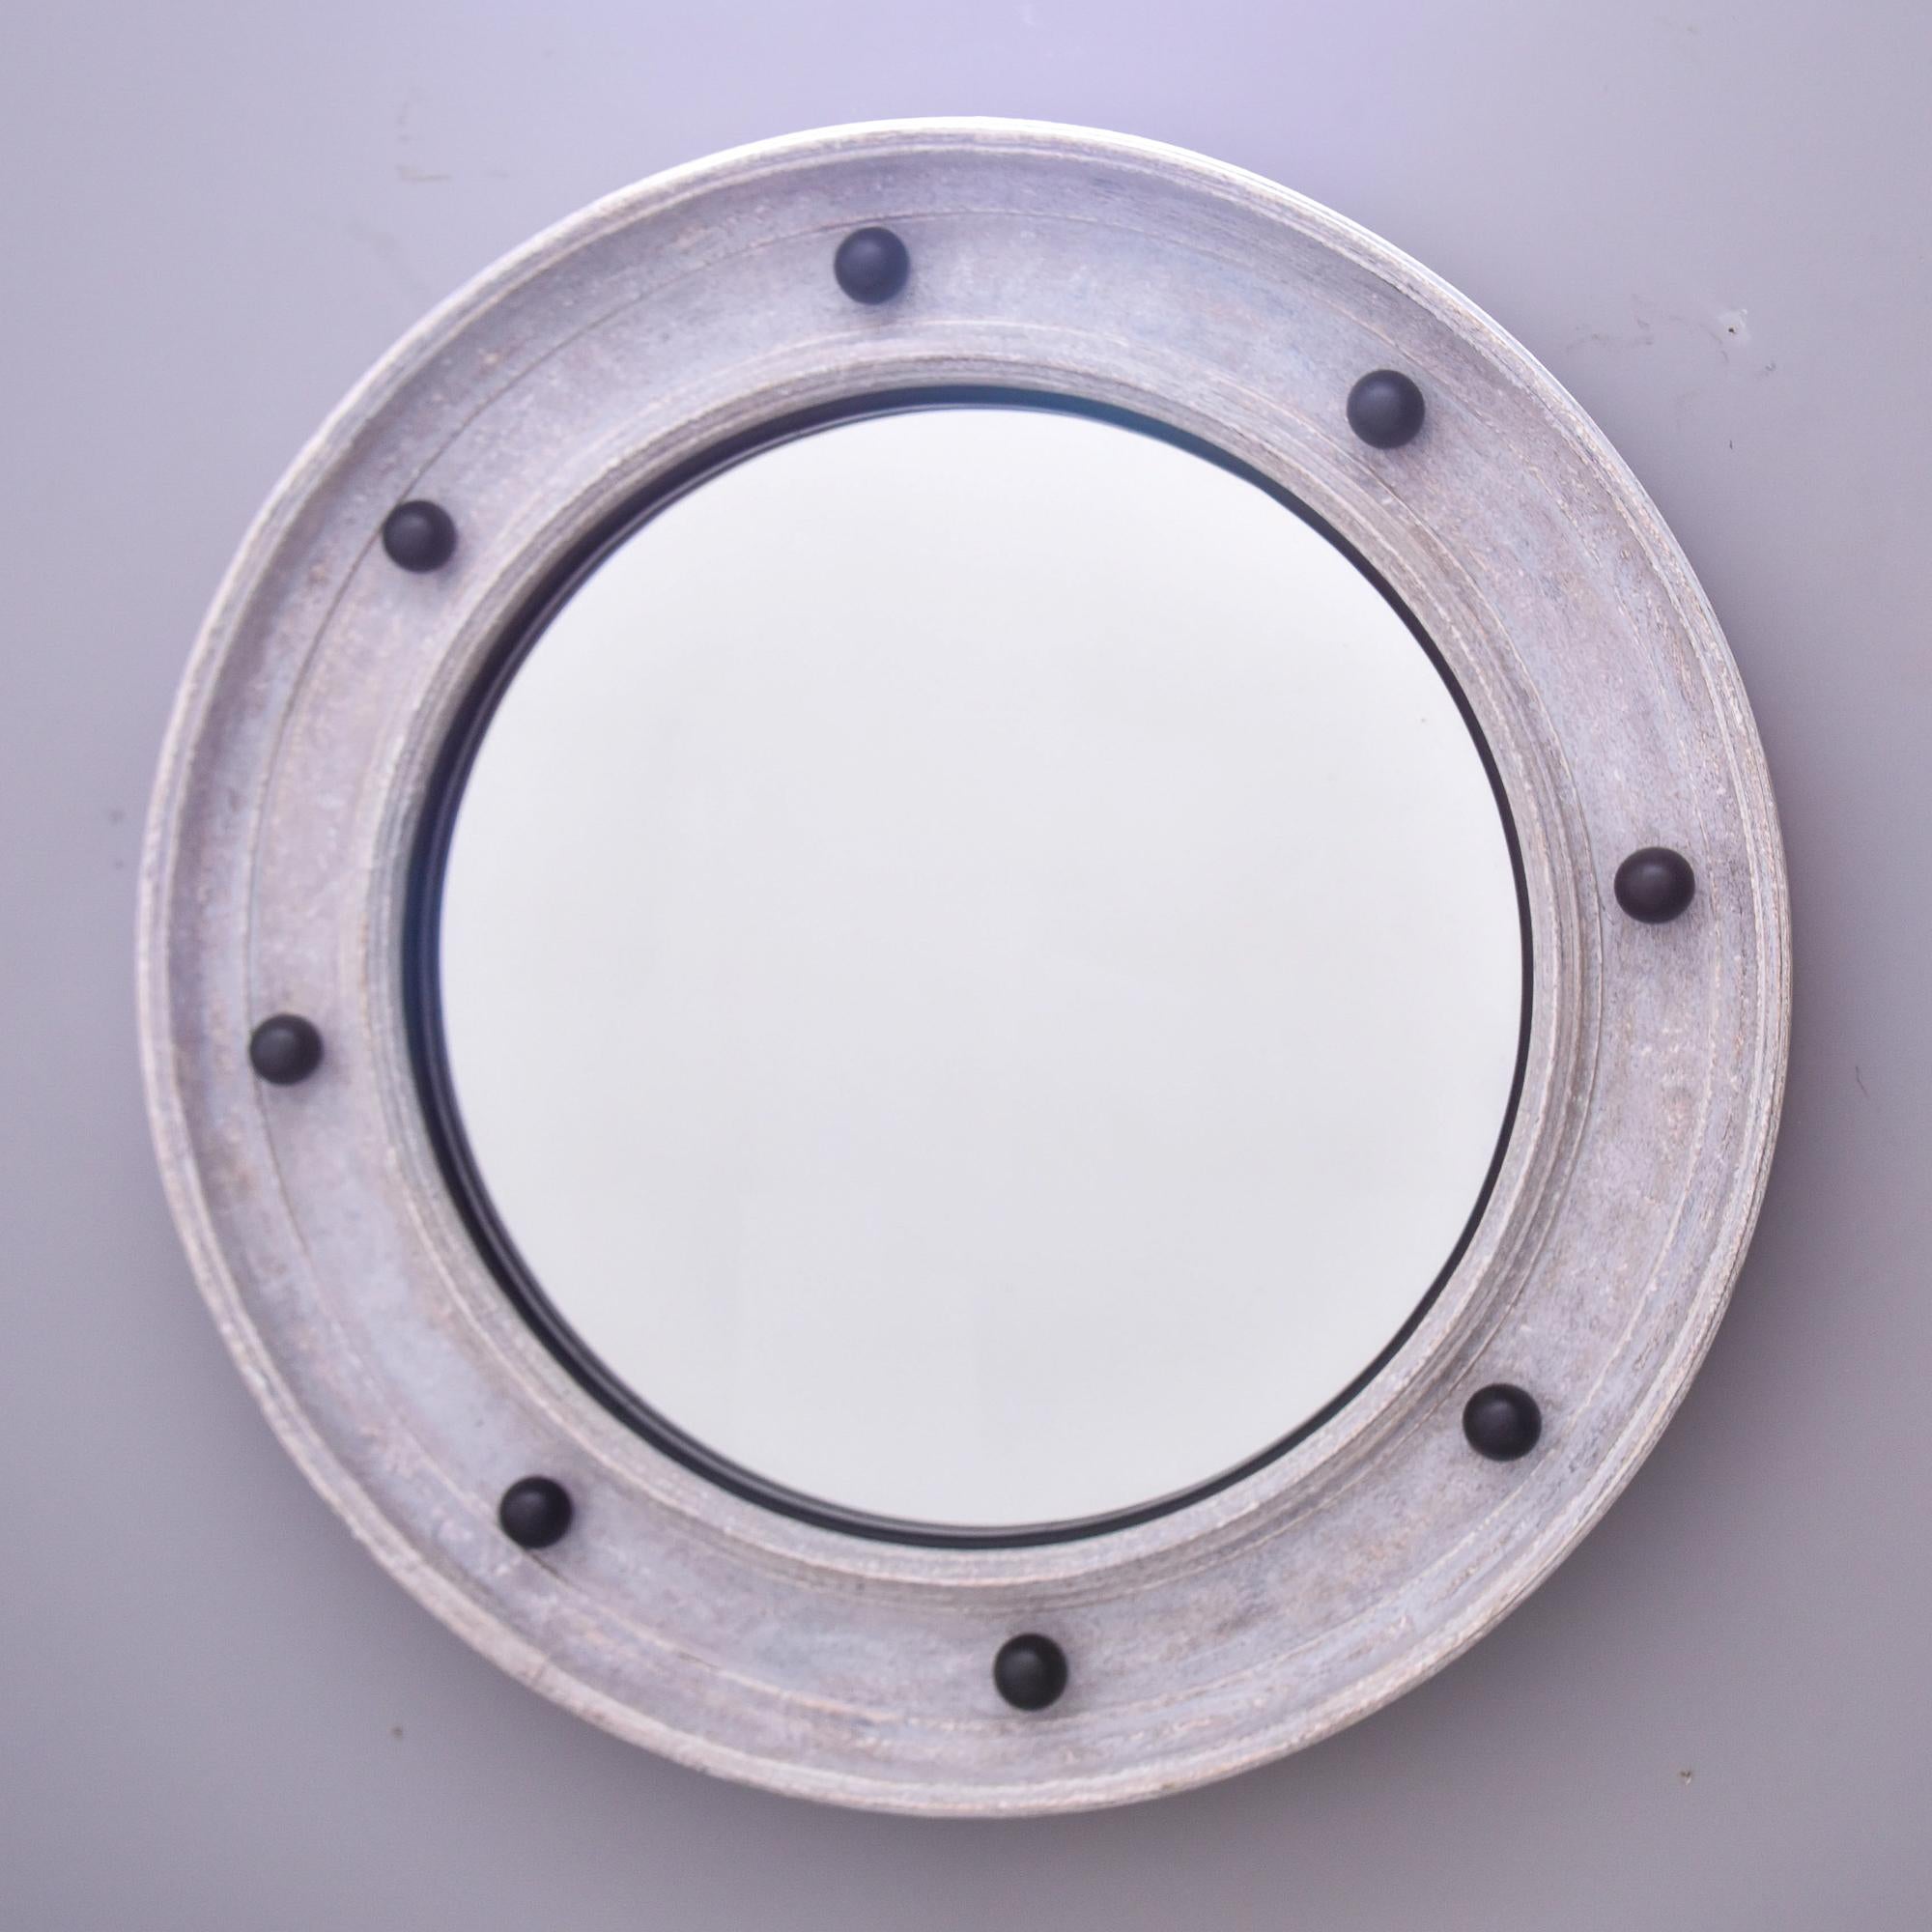 New and custom made for us in England. This large, round, Swedish-style mirror has a wide beveled frame with a gray painted finish accented with contrasting black spheres. 

Actual mirror size: 28.75” h x 28.75” w